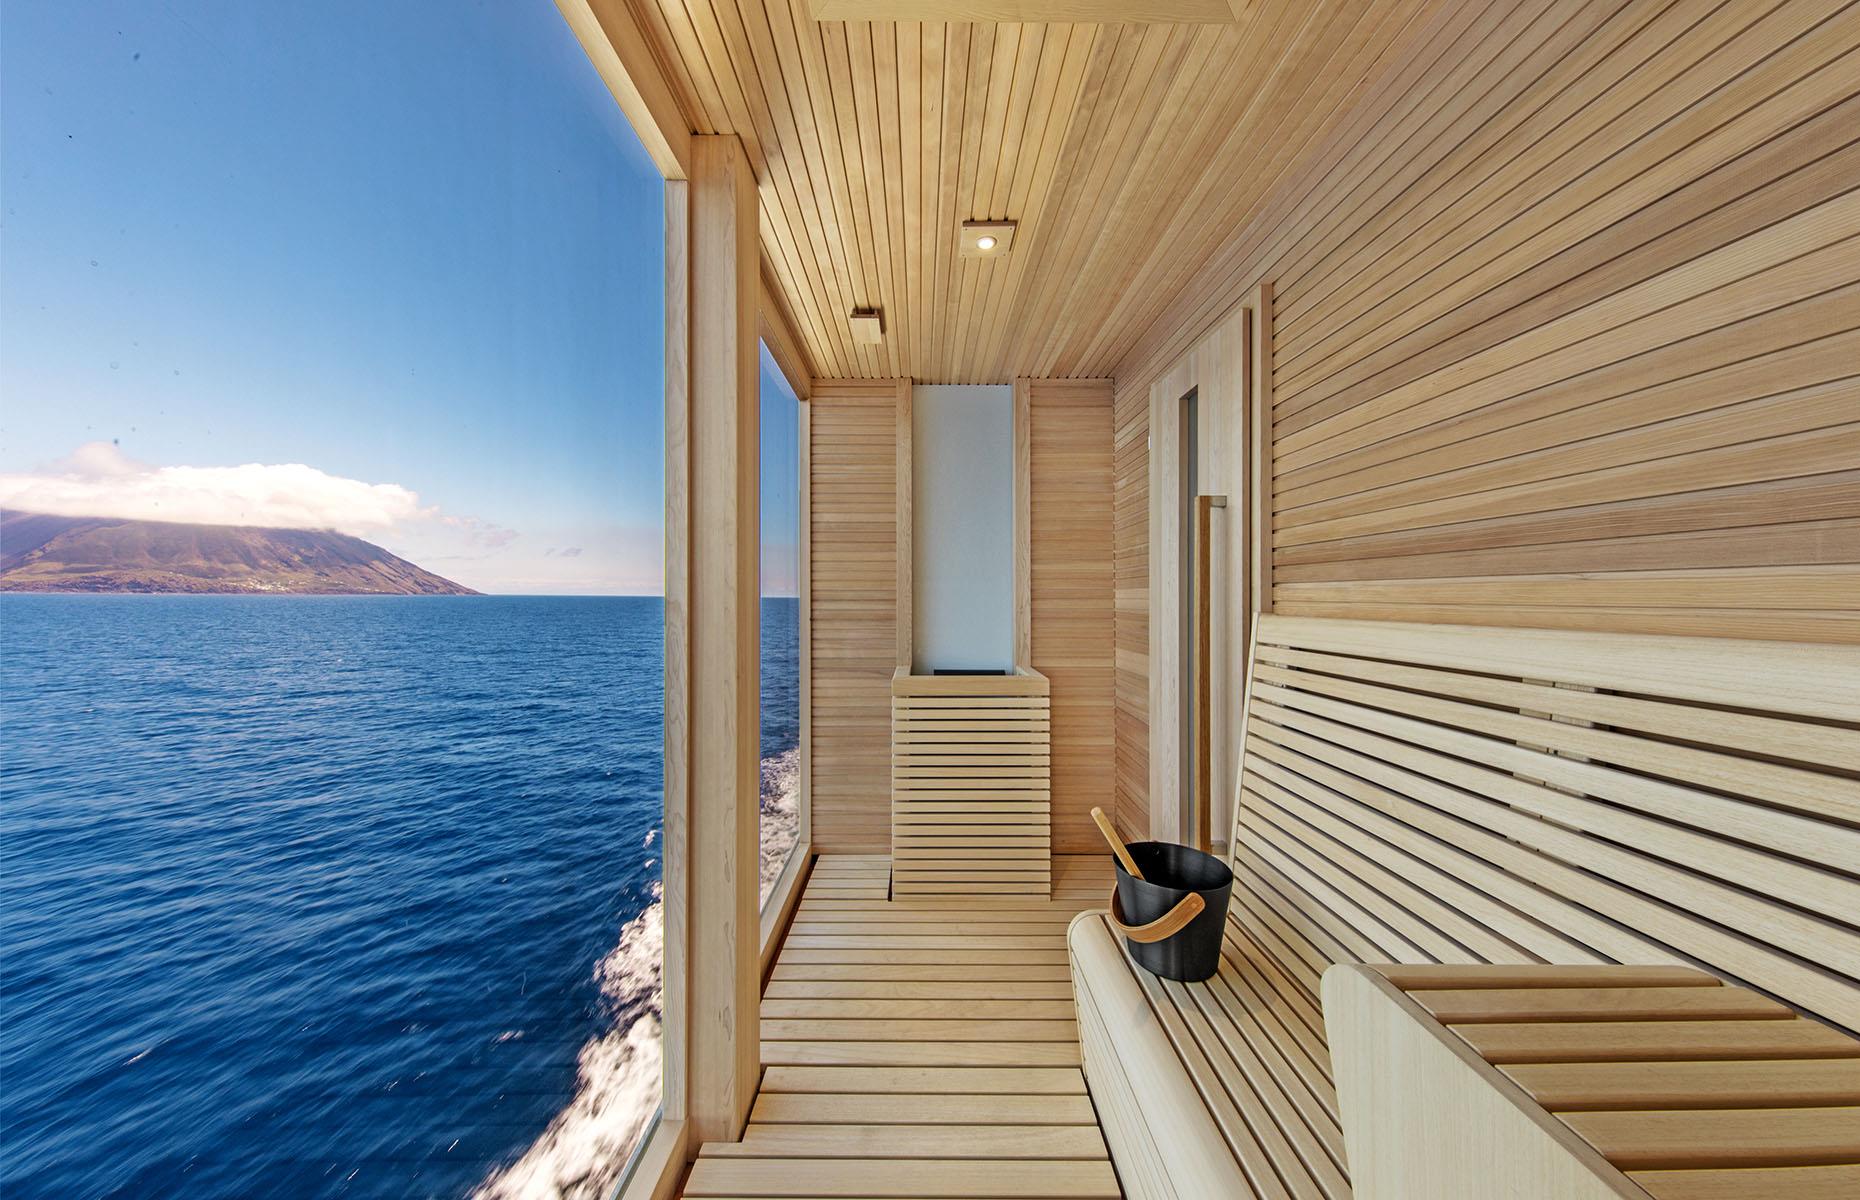 <p>However, we think the standout perk has to be this private ocean-view dry sauna, which is accessed from your own personal veranda. In 2024, Saturn will be calling at ports all over Europe, as well as taking in Iceland's majestic landscapes and sailing the trade routes of the Middle Ages. Saturn's newest route sails from Barcelona to Mumbai, stopping for 20 tours across 12 countries in 35 days. Prices for the Owner's Suite start from around £14,890 ($18.8k) per person for the shorter eight-day itineraries. </p>